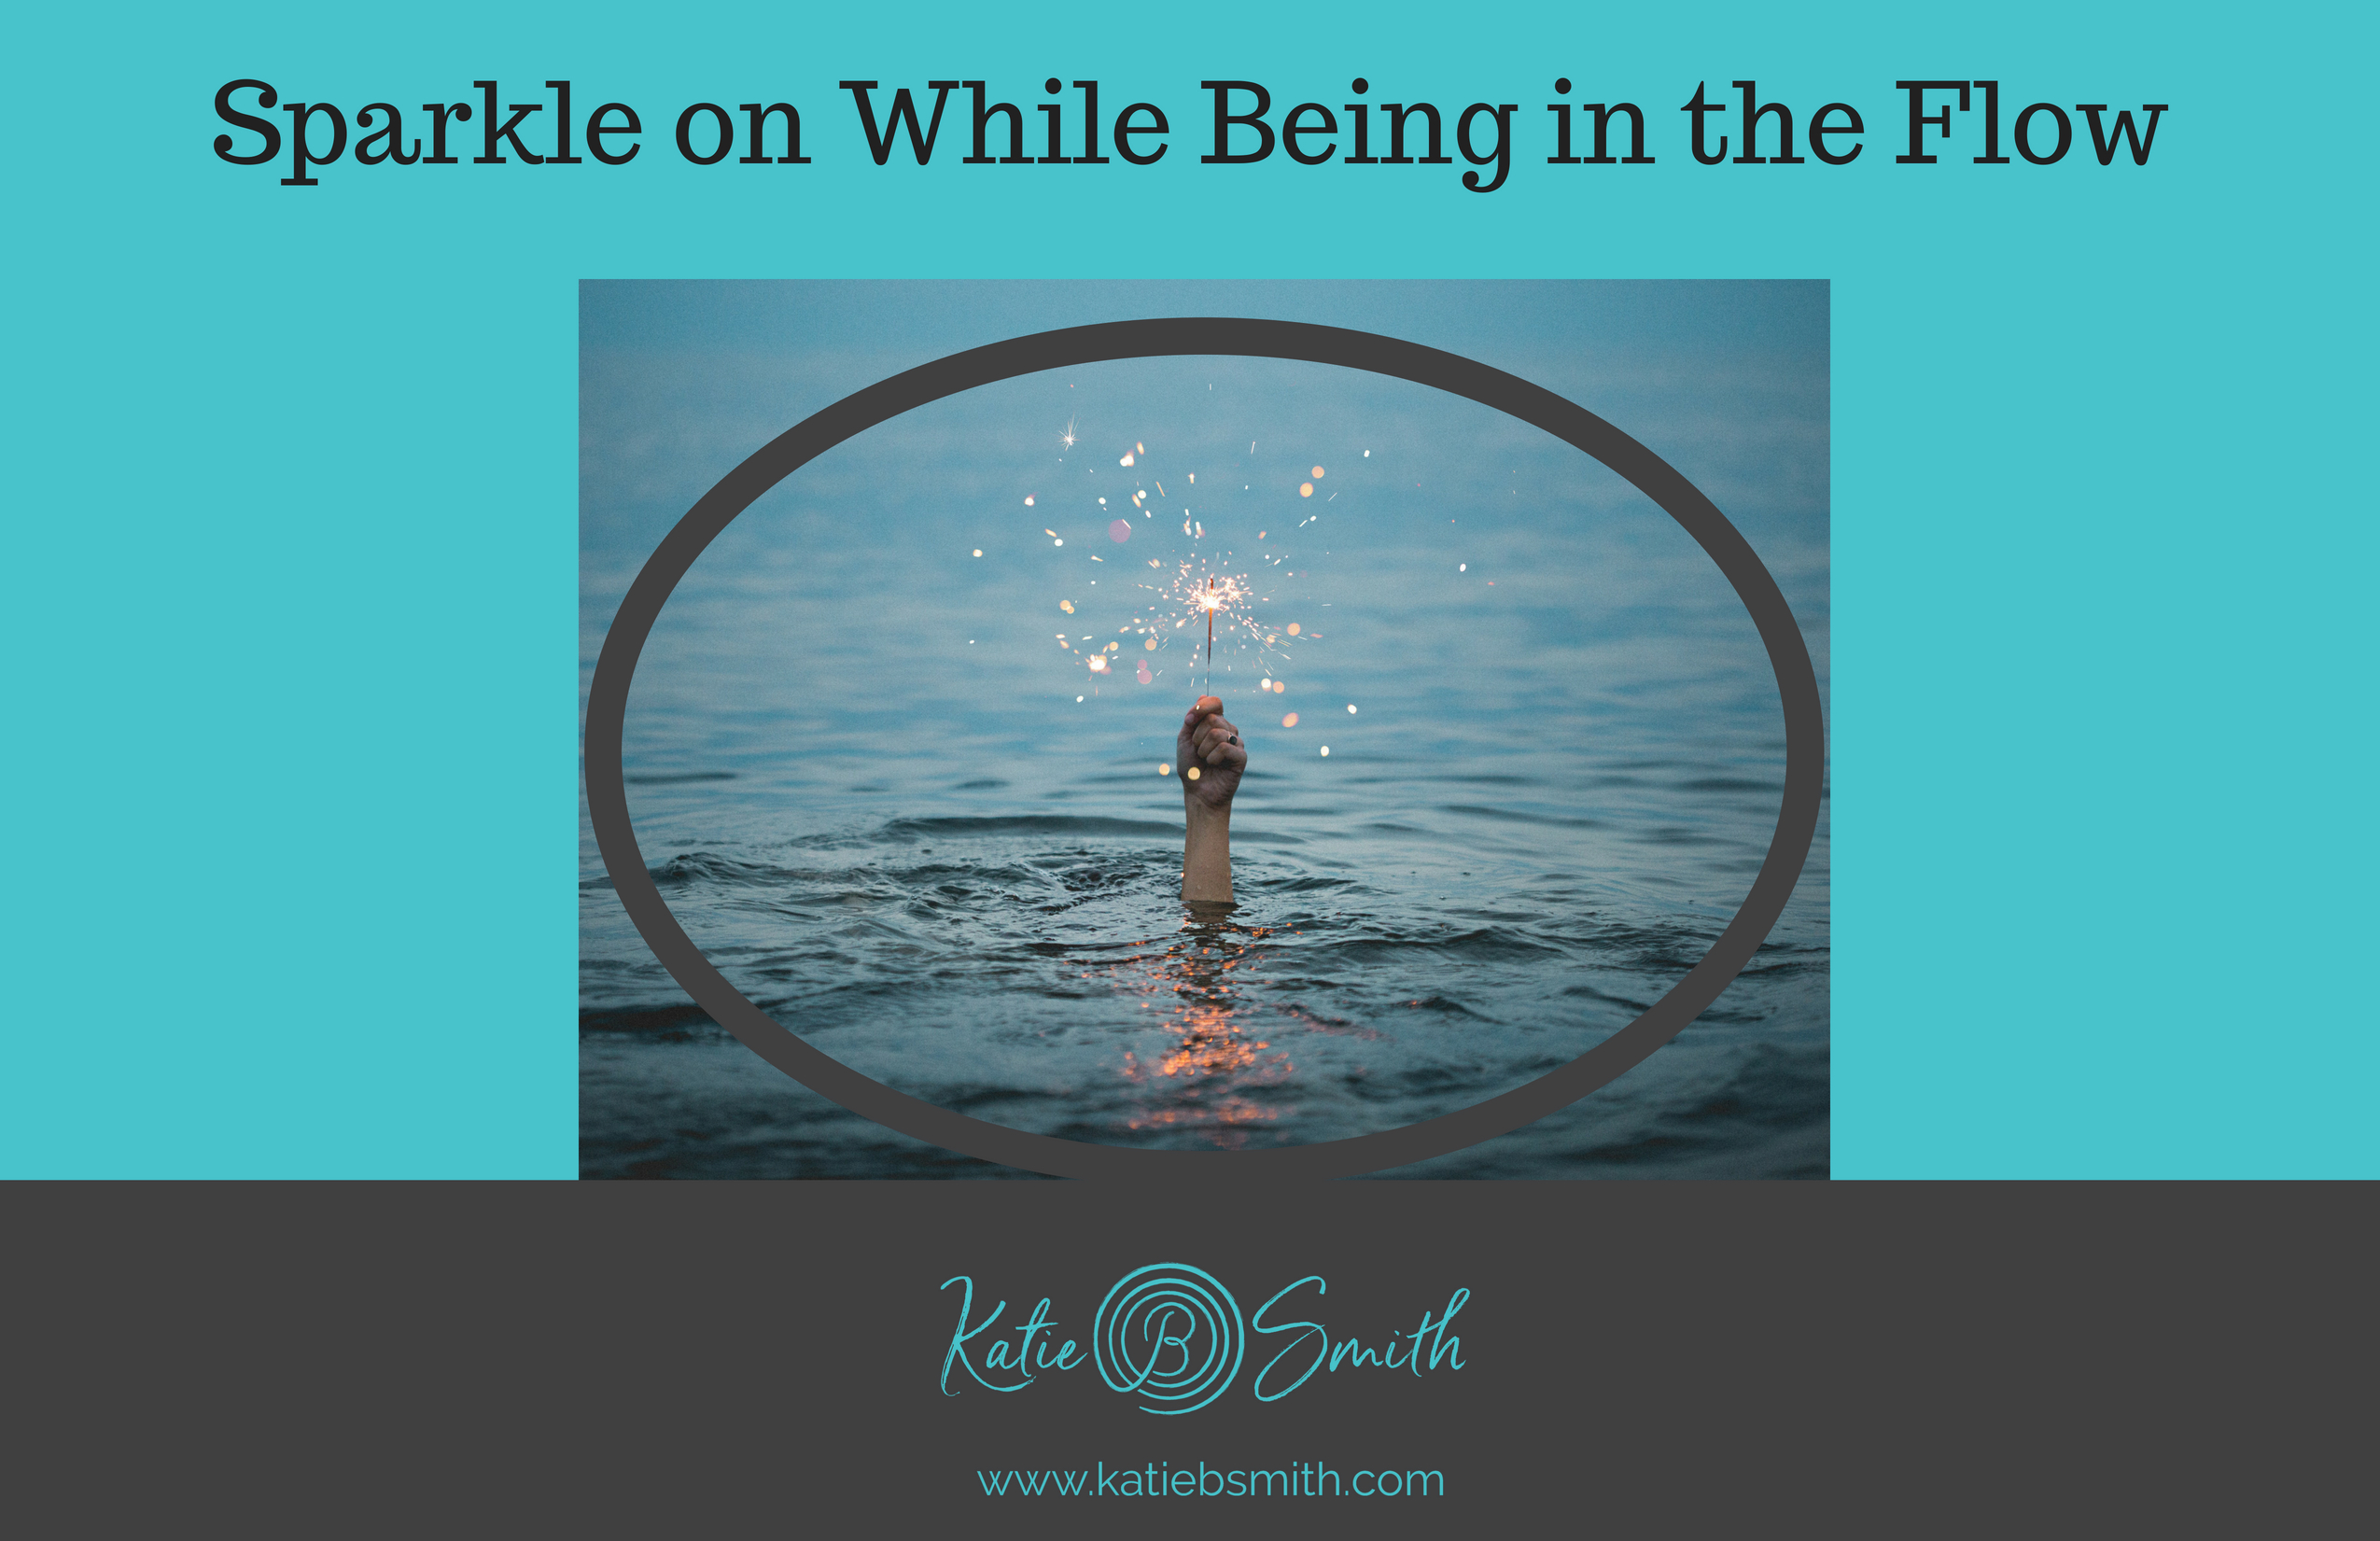 Sparkle on While Being in the Flow